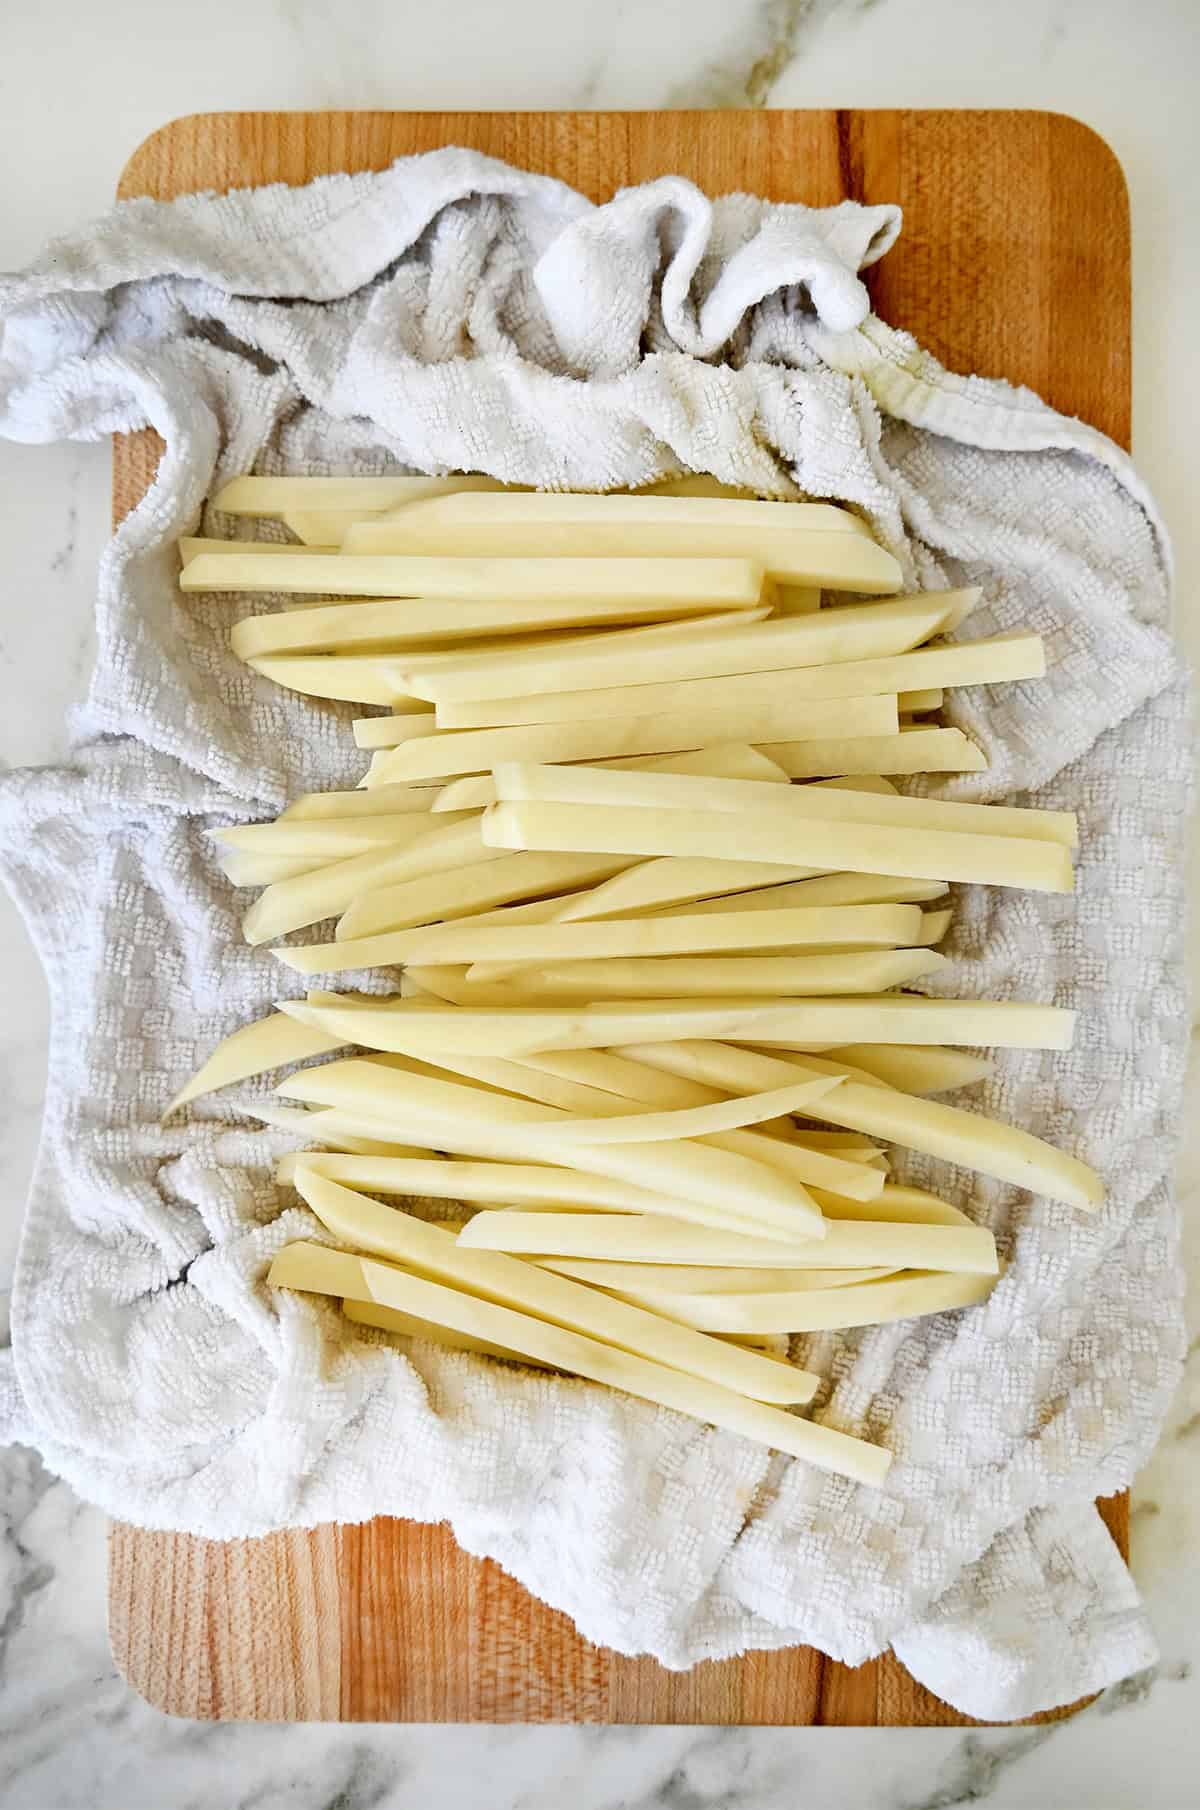 Potato batons drying on a kitchen towel after soaking in water.